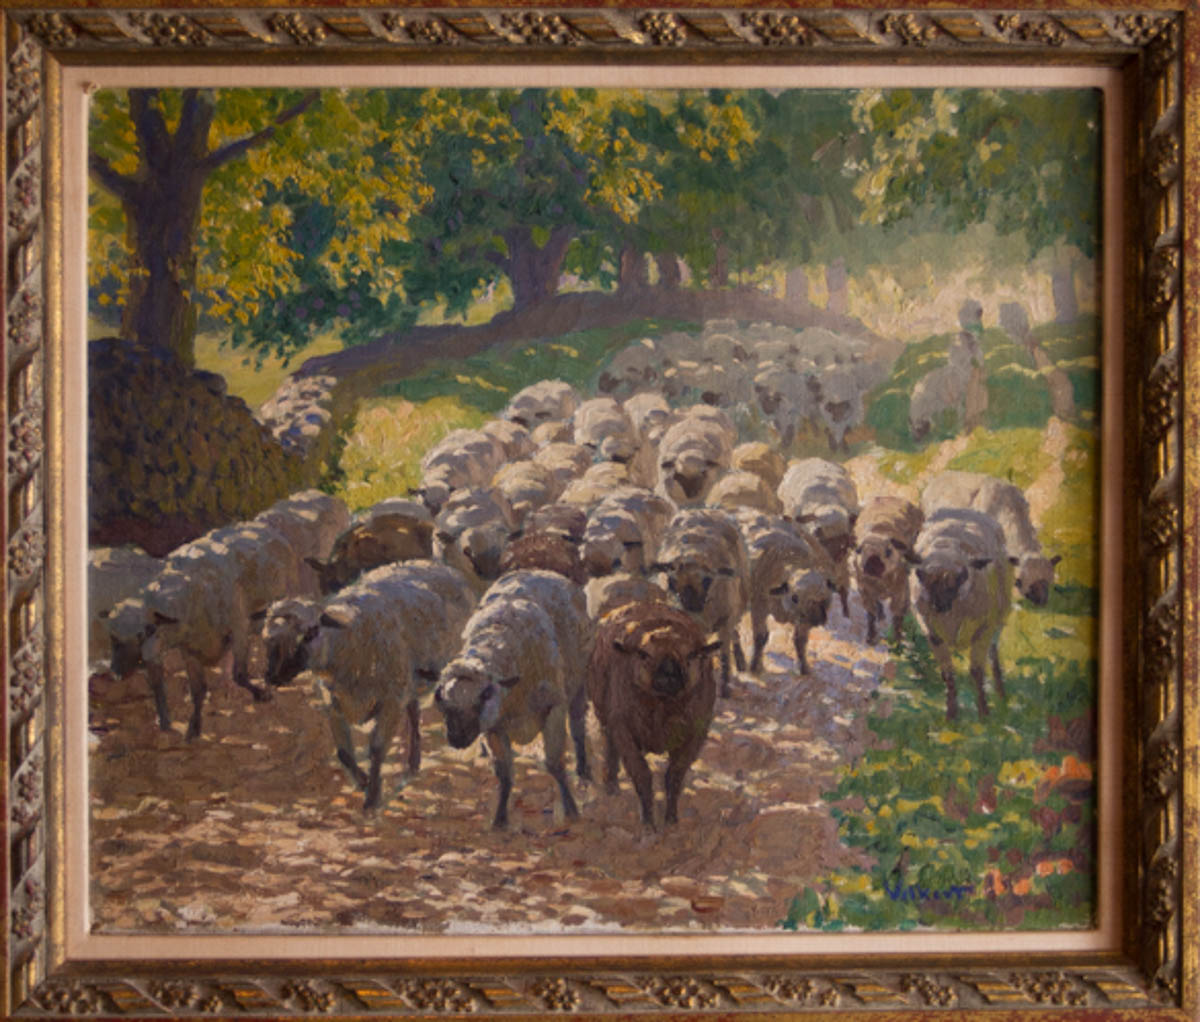 Untitled [Sheep on road with one brown animal in front]